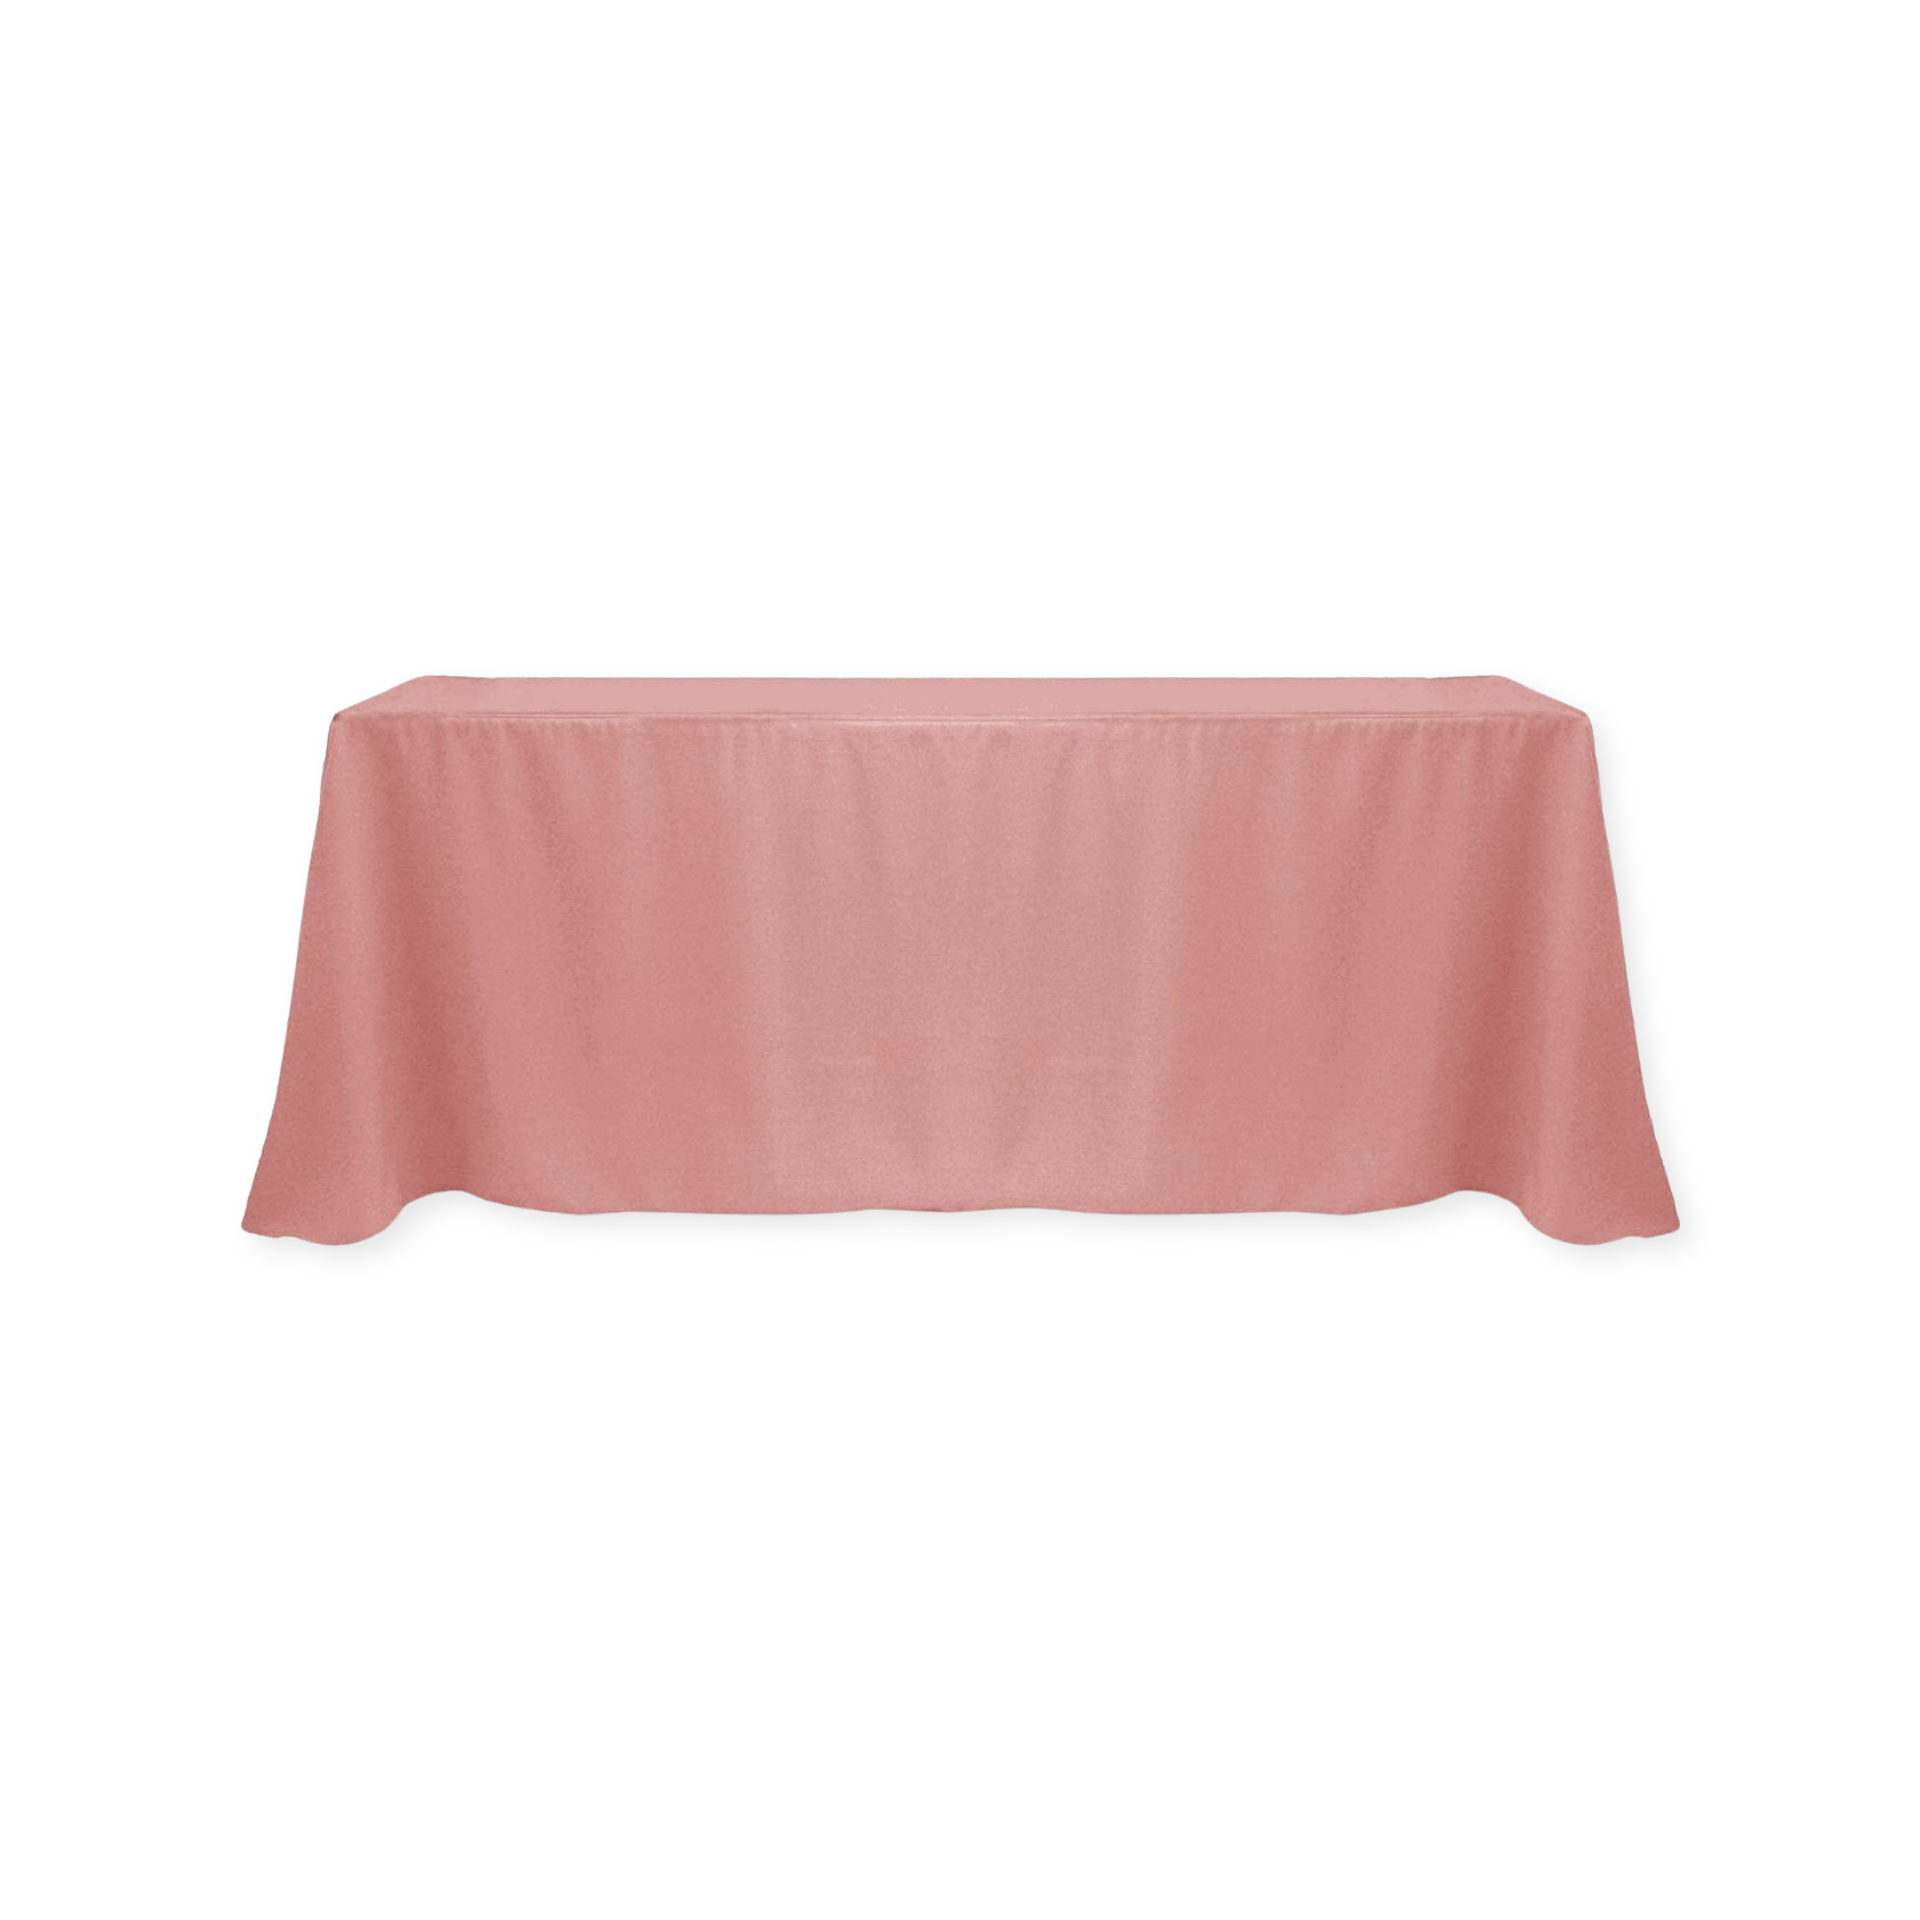 Tablecloth polyester rectangle dusty rose commercial grade wedding party event rental panama city beach